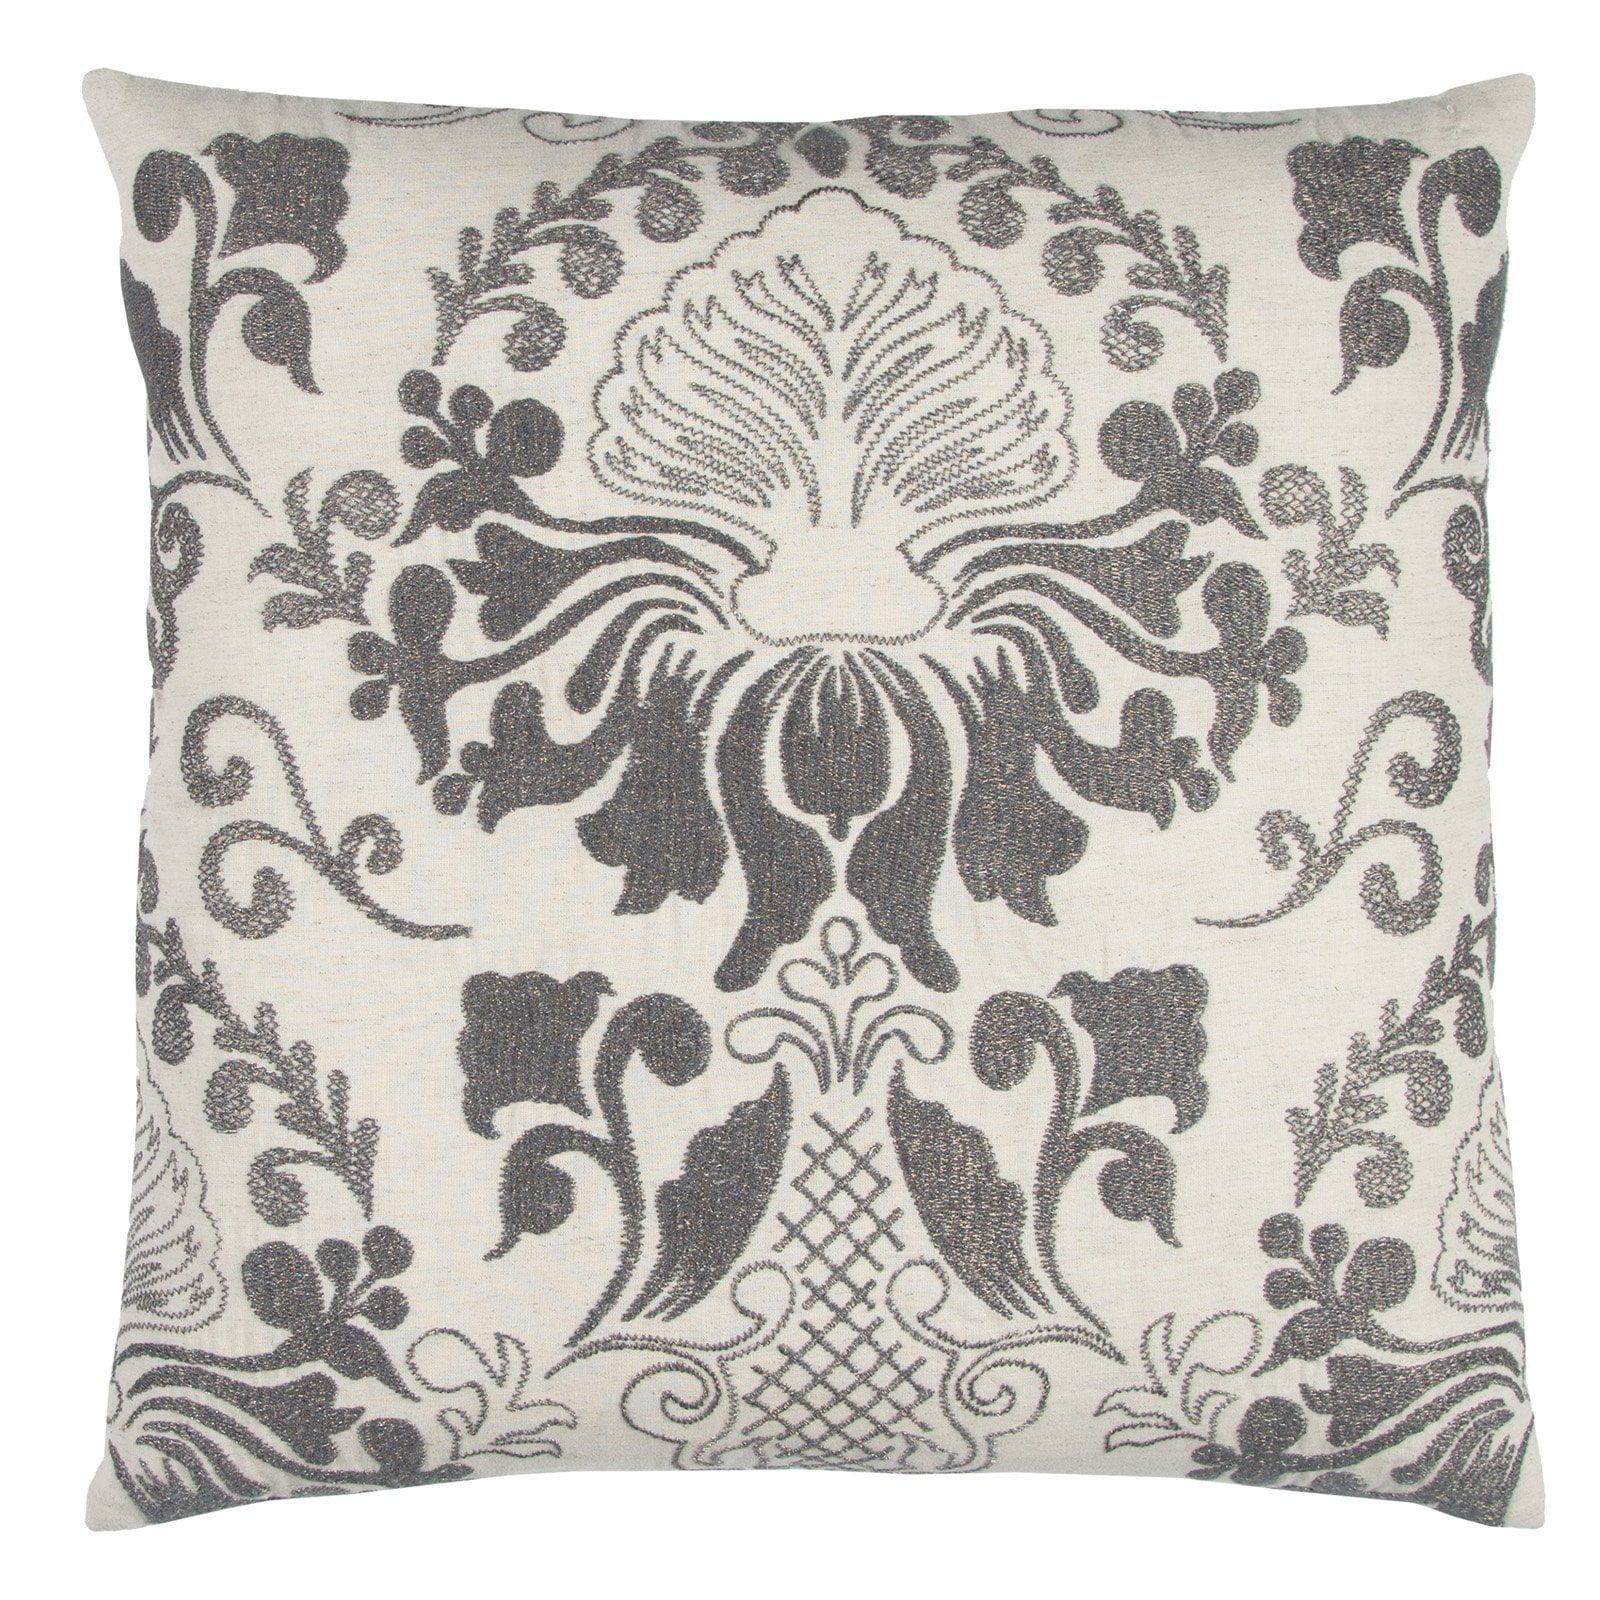 Rizzy Home Decorative Poly Filled Throw Pillow Damask 20